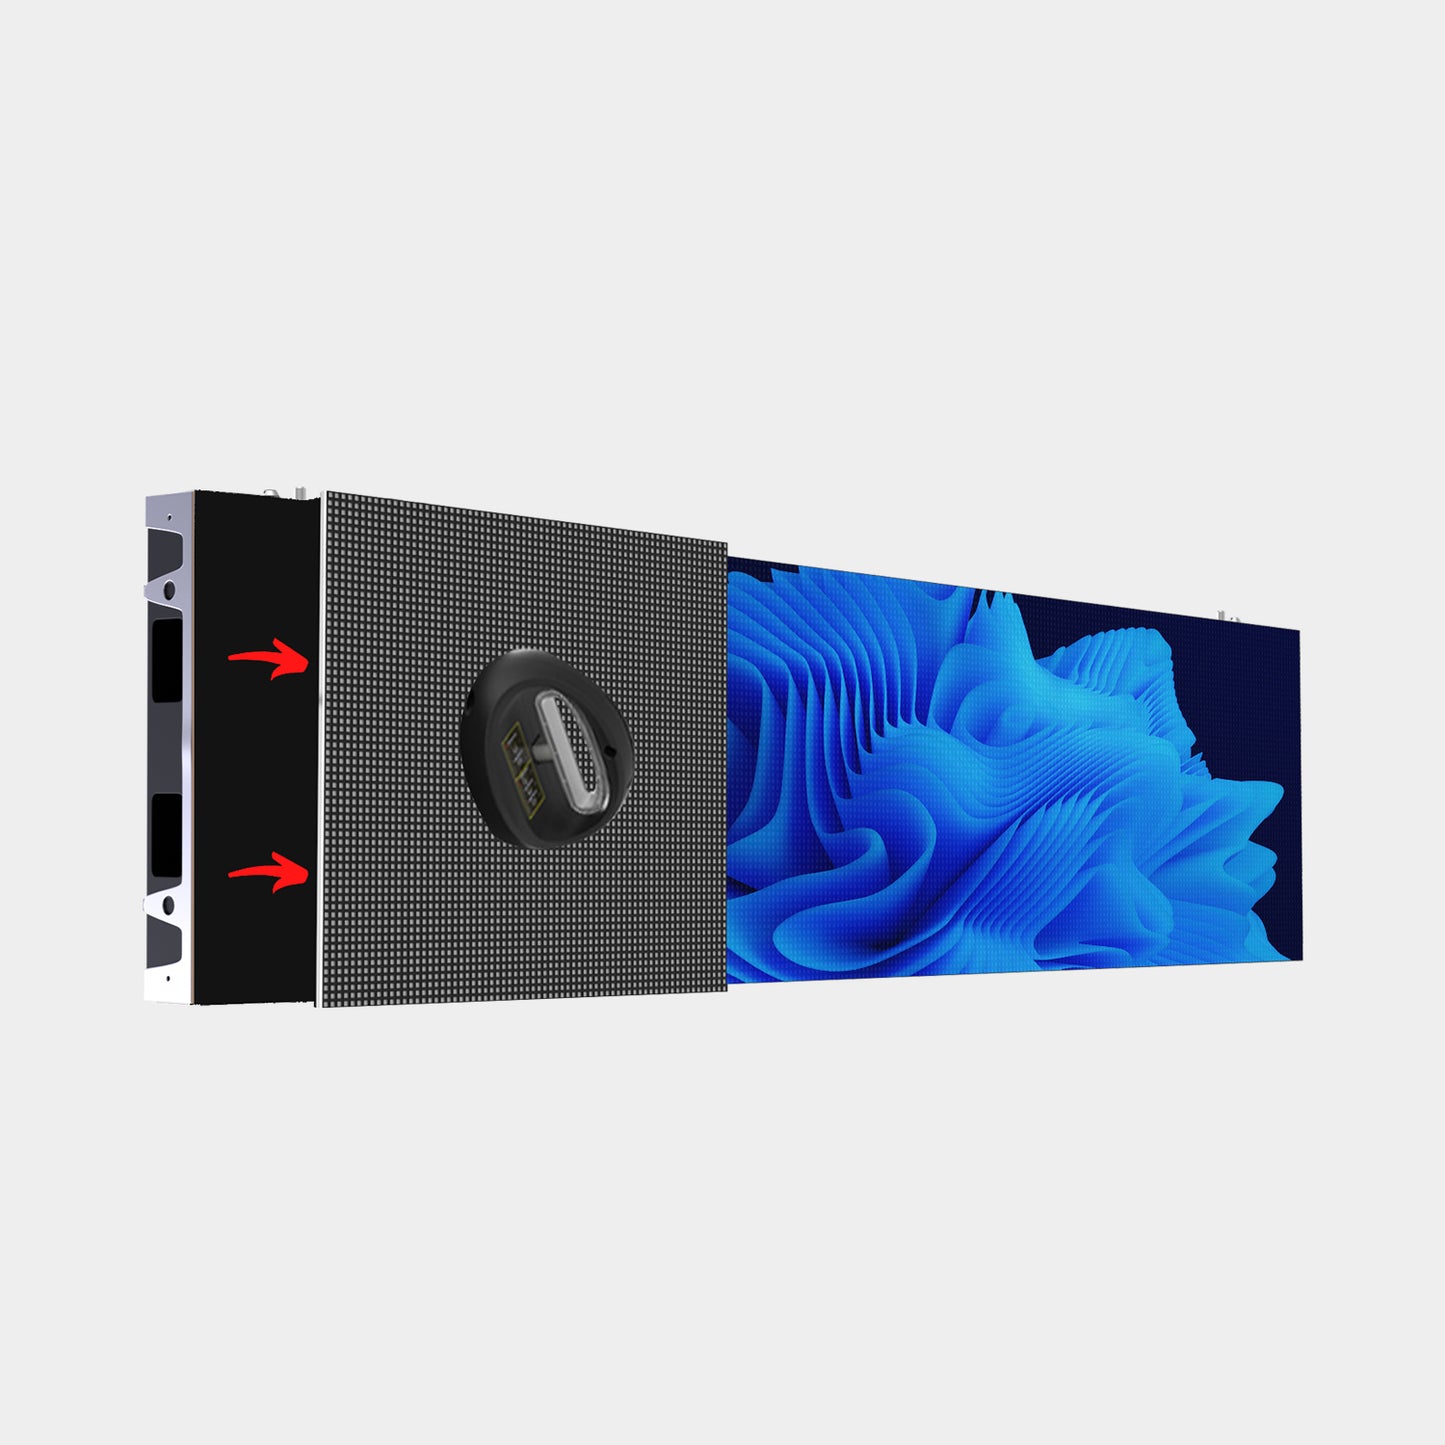 U2 indoor front access and high definition video panel